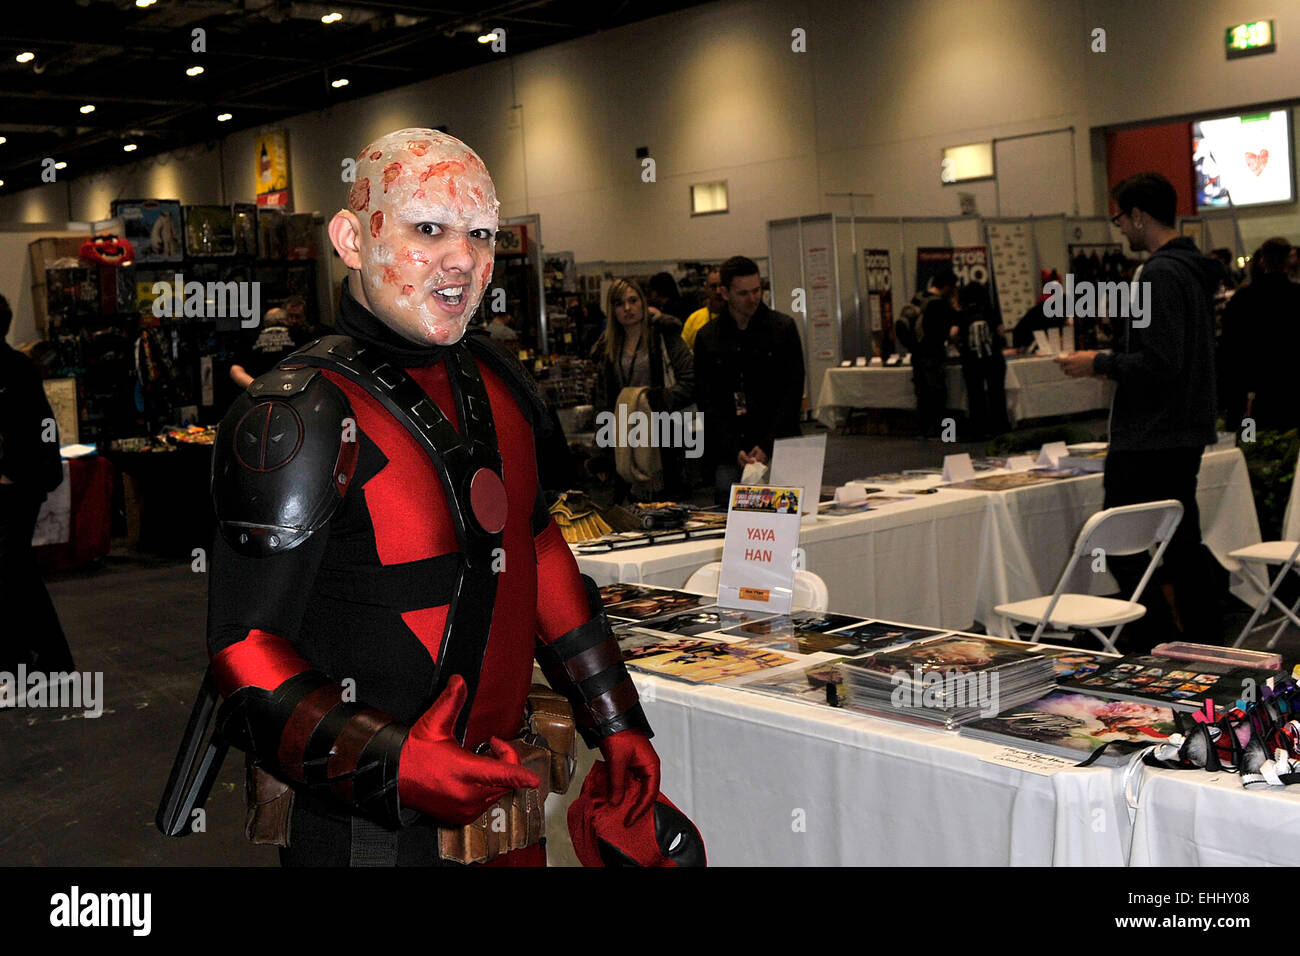 London, UK. 14th March, 2015. Nick, originally from Wisconsin, USA, joined hundreds of other comic and cosplay fans as they flooded the Excel centre for the LONDON SUPER COMIC CONVENTION. Nick dressed as ‘DEAD POOL' a Marvel Comic character. Alamy Live News/Photographer Gordon Scammell Stock Photo